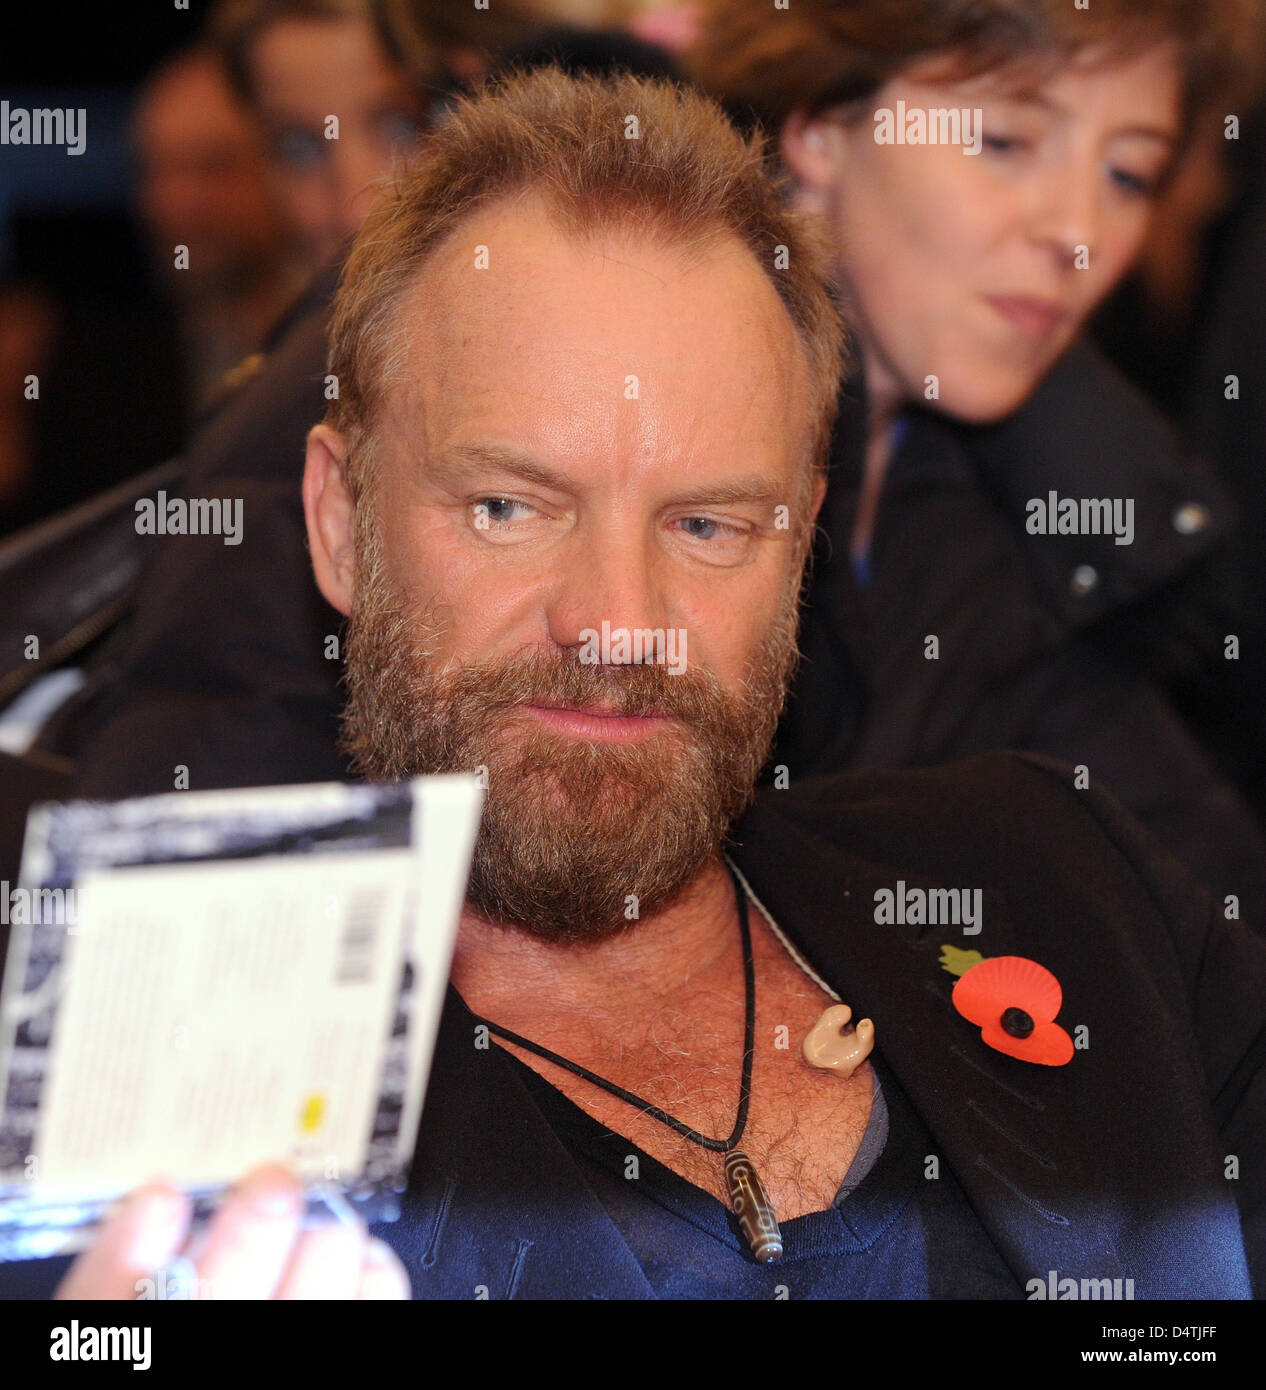 Rockstar Sting during his appearance at the 35th anniversary edition of live talkshow '3nach9' ('Three past nine') on German public broadcasting station Radio Bremen in Bremen, Germany, 06 November 2009. The first edition of the show was aired on 06 November 1974. Photo: Ingo Wagner Stock Photo